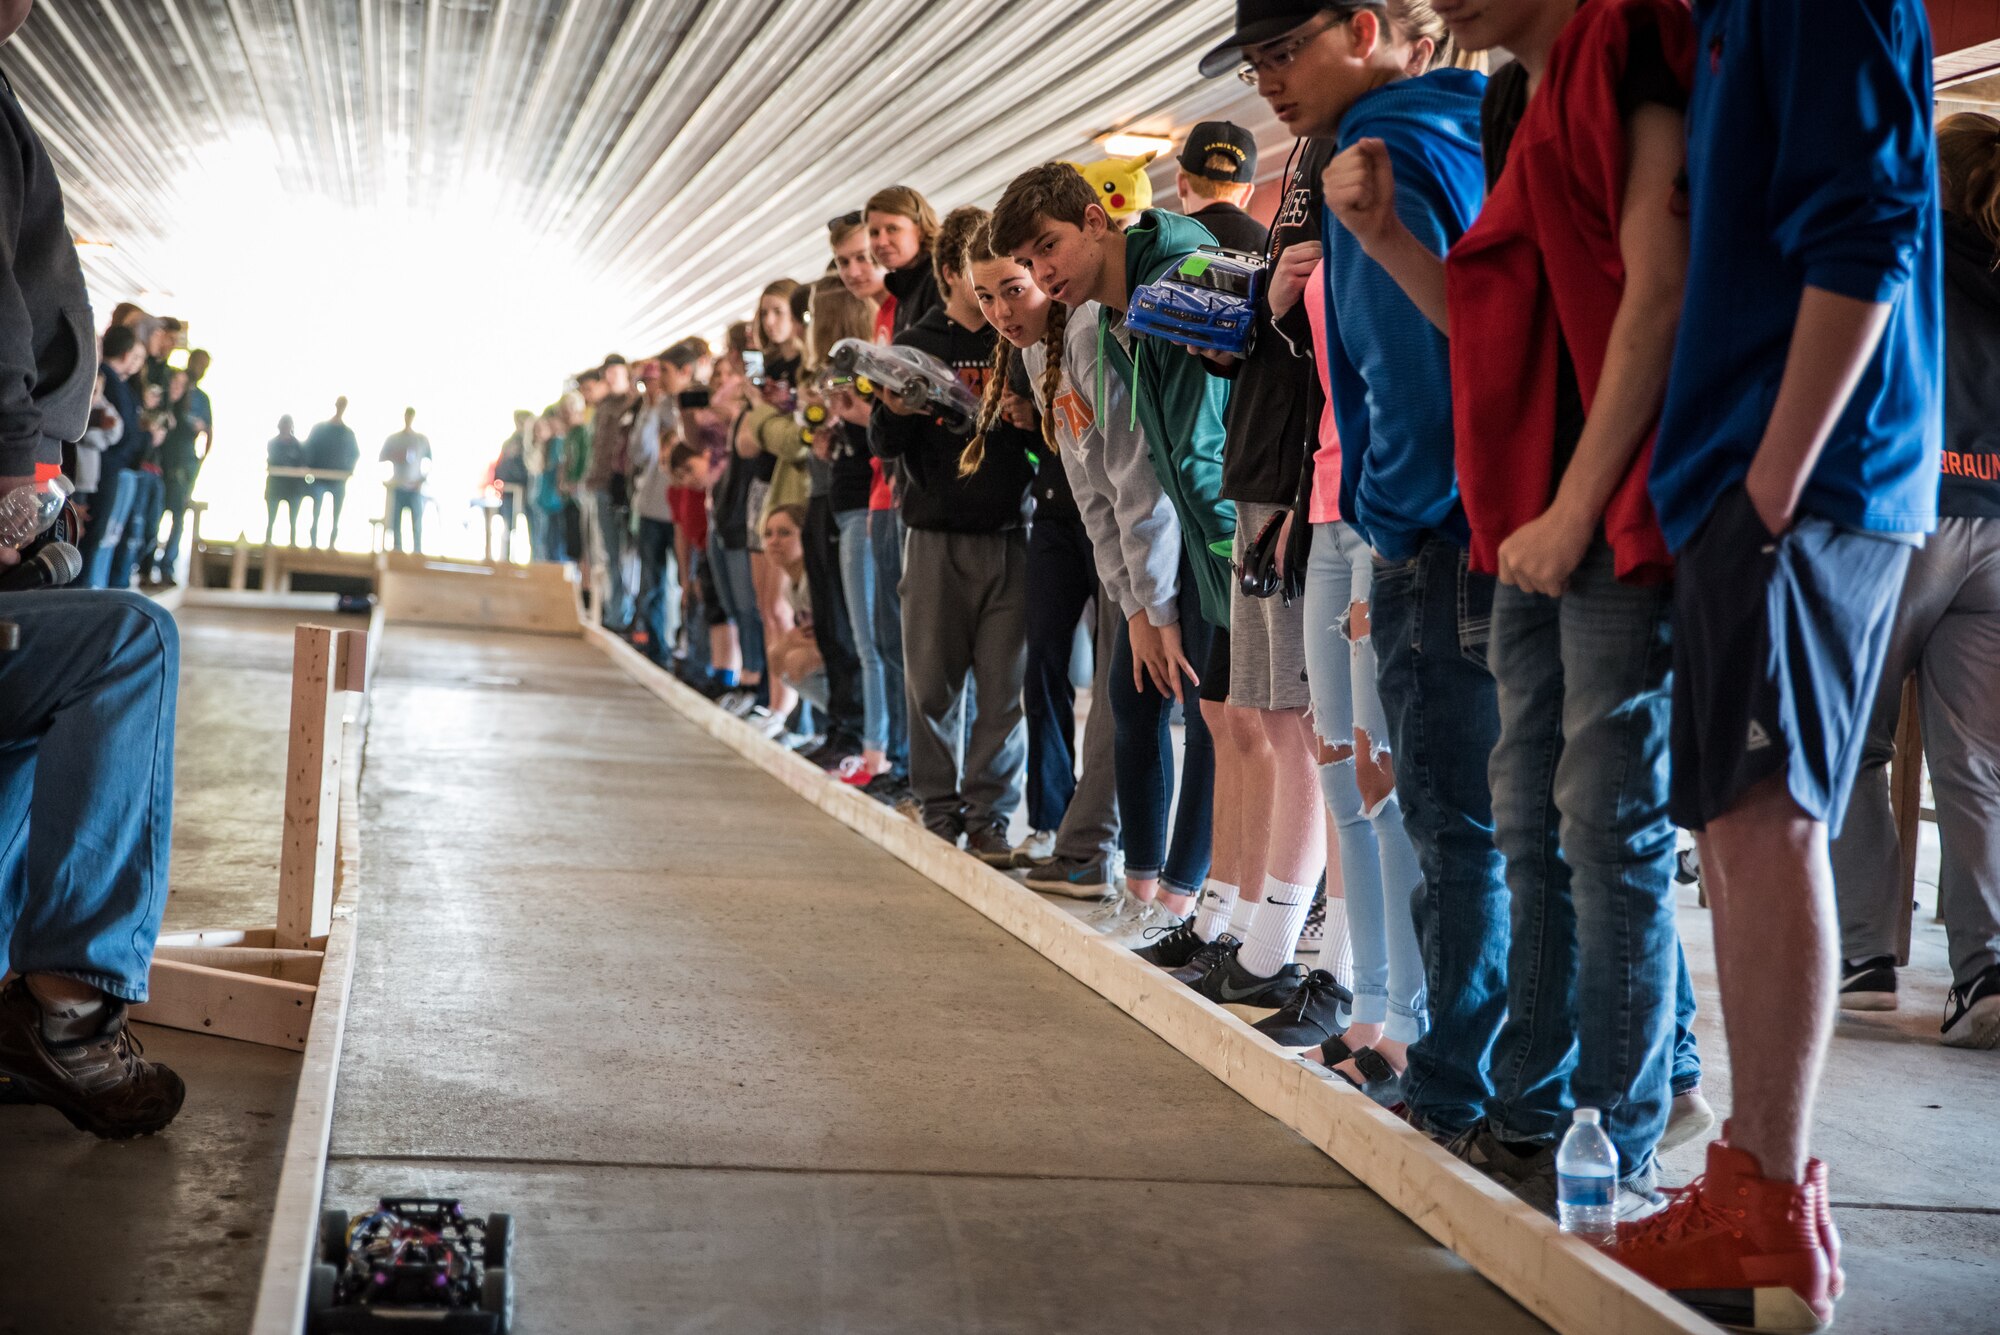 Students from nine local schools watch the remote-controlled car races during the Air Force Research Laboratory’s 7th annual Full Throttle STEM at Eldora Speedway May 14. (U.S. Air Force photo/Richard Eldridge)